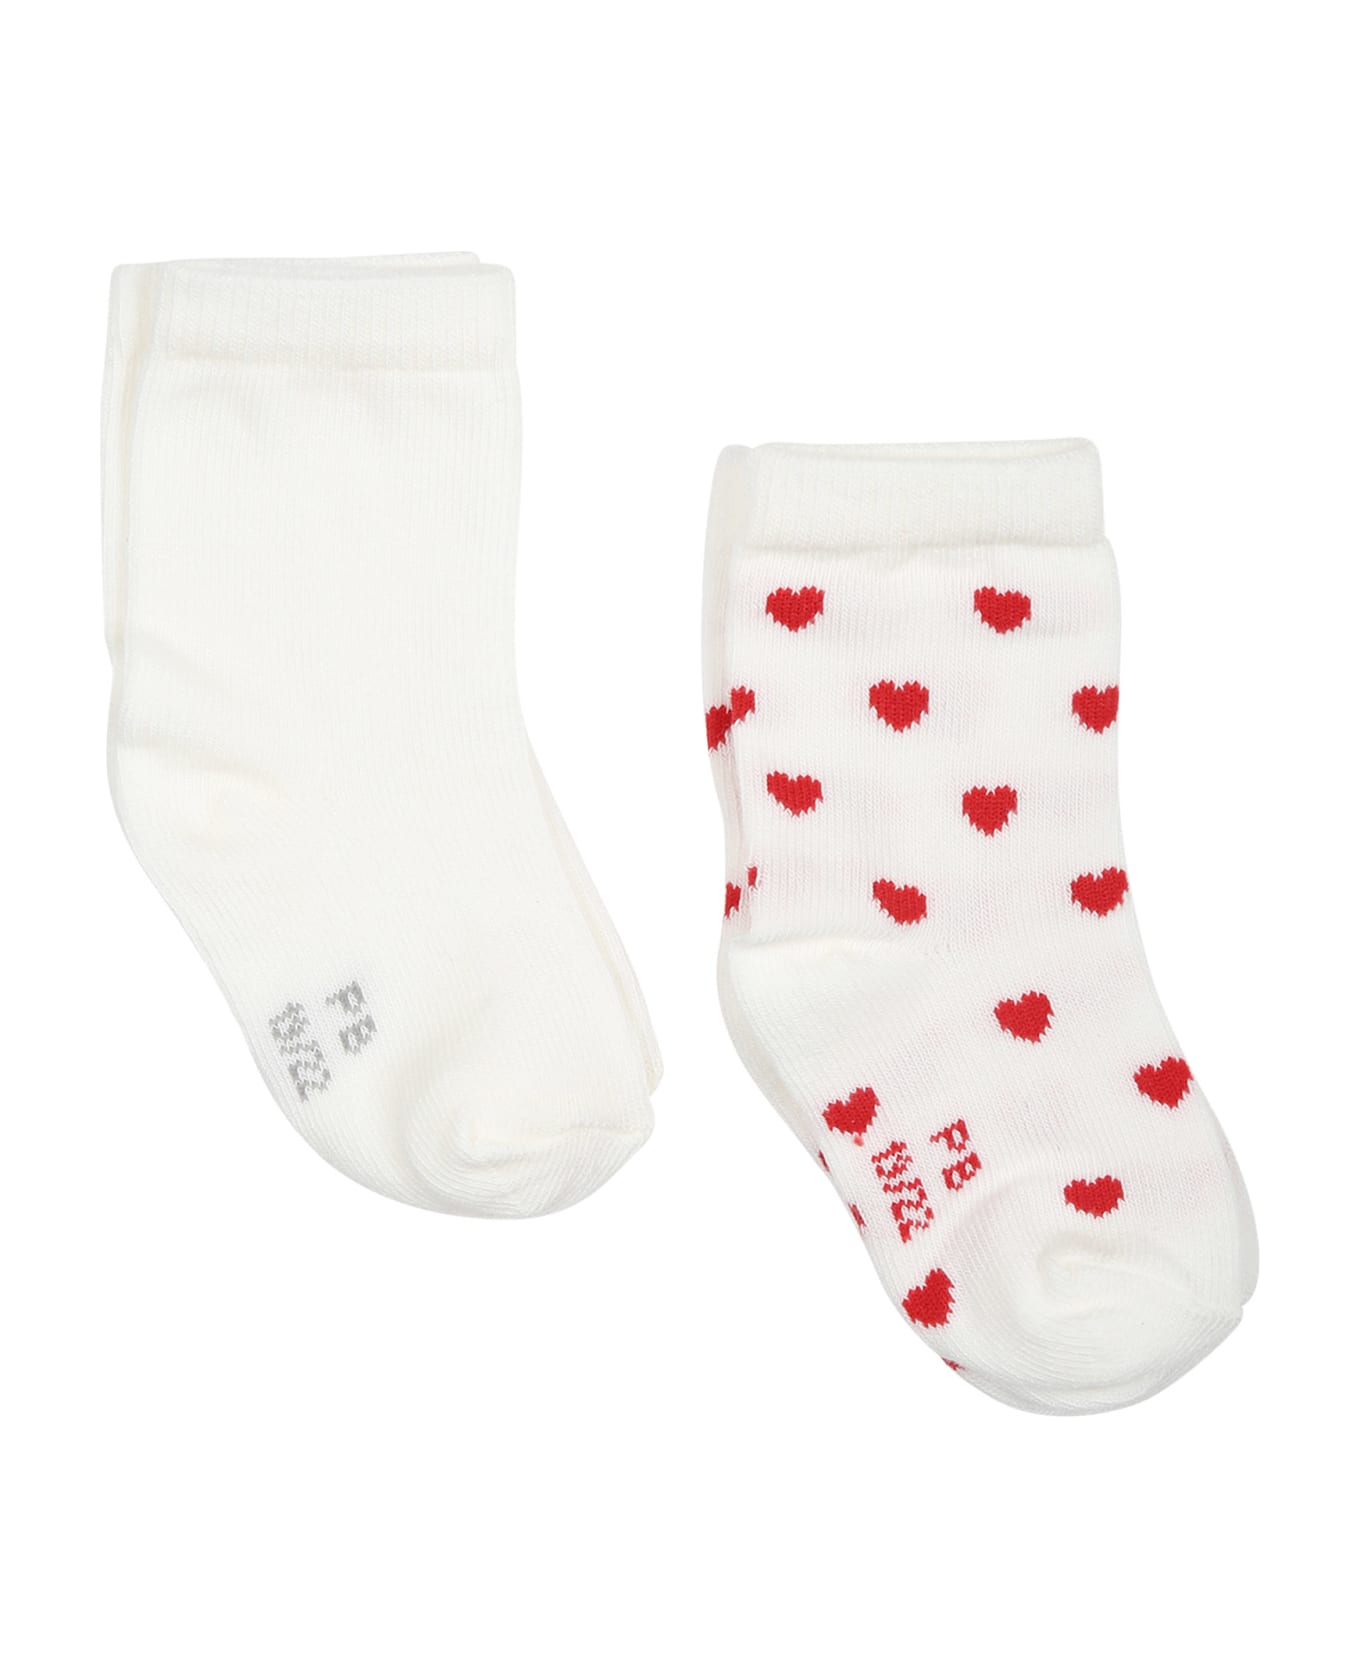 Petit Bateau Set Of Socks For Baby Girl With Hearts - White